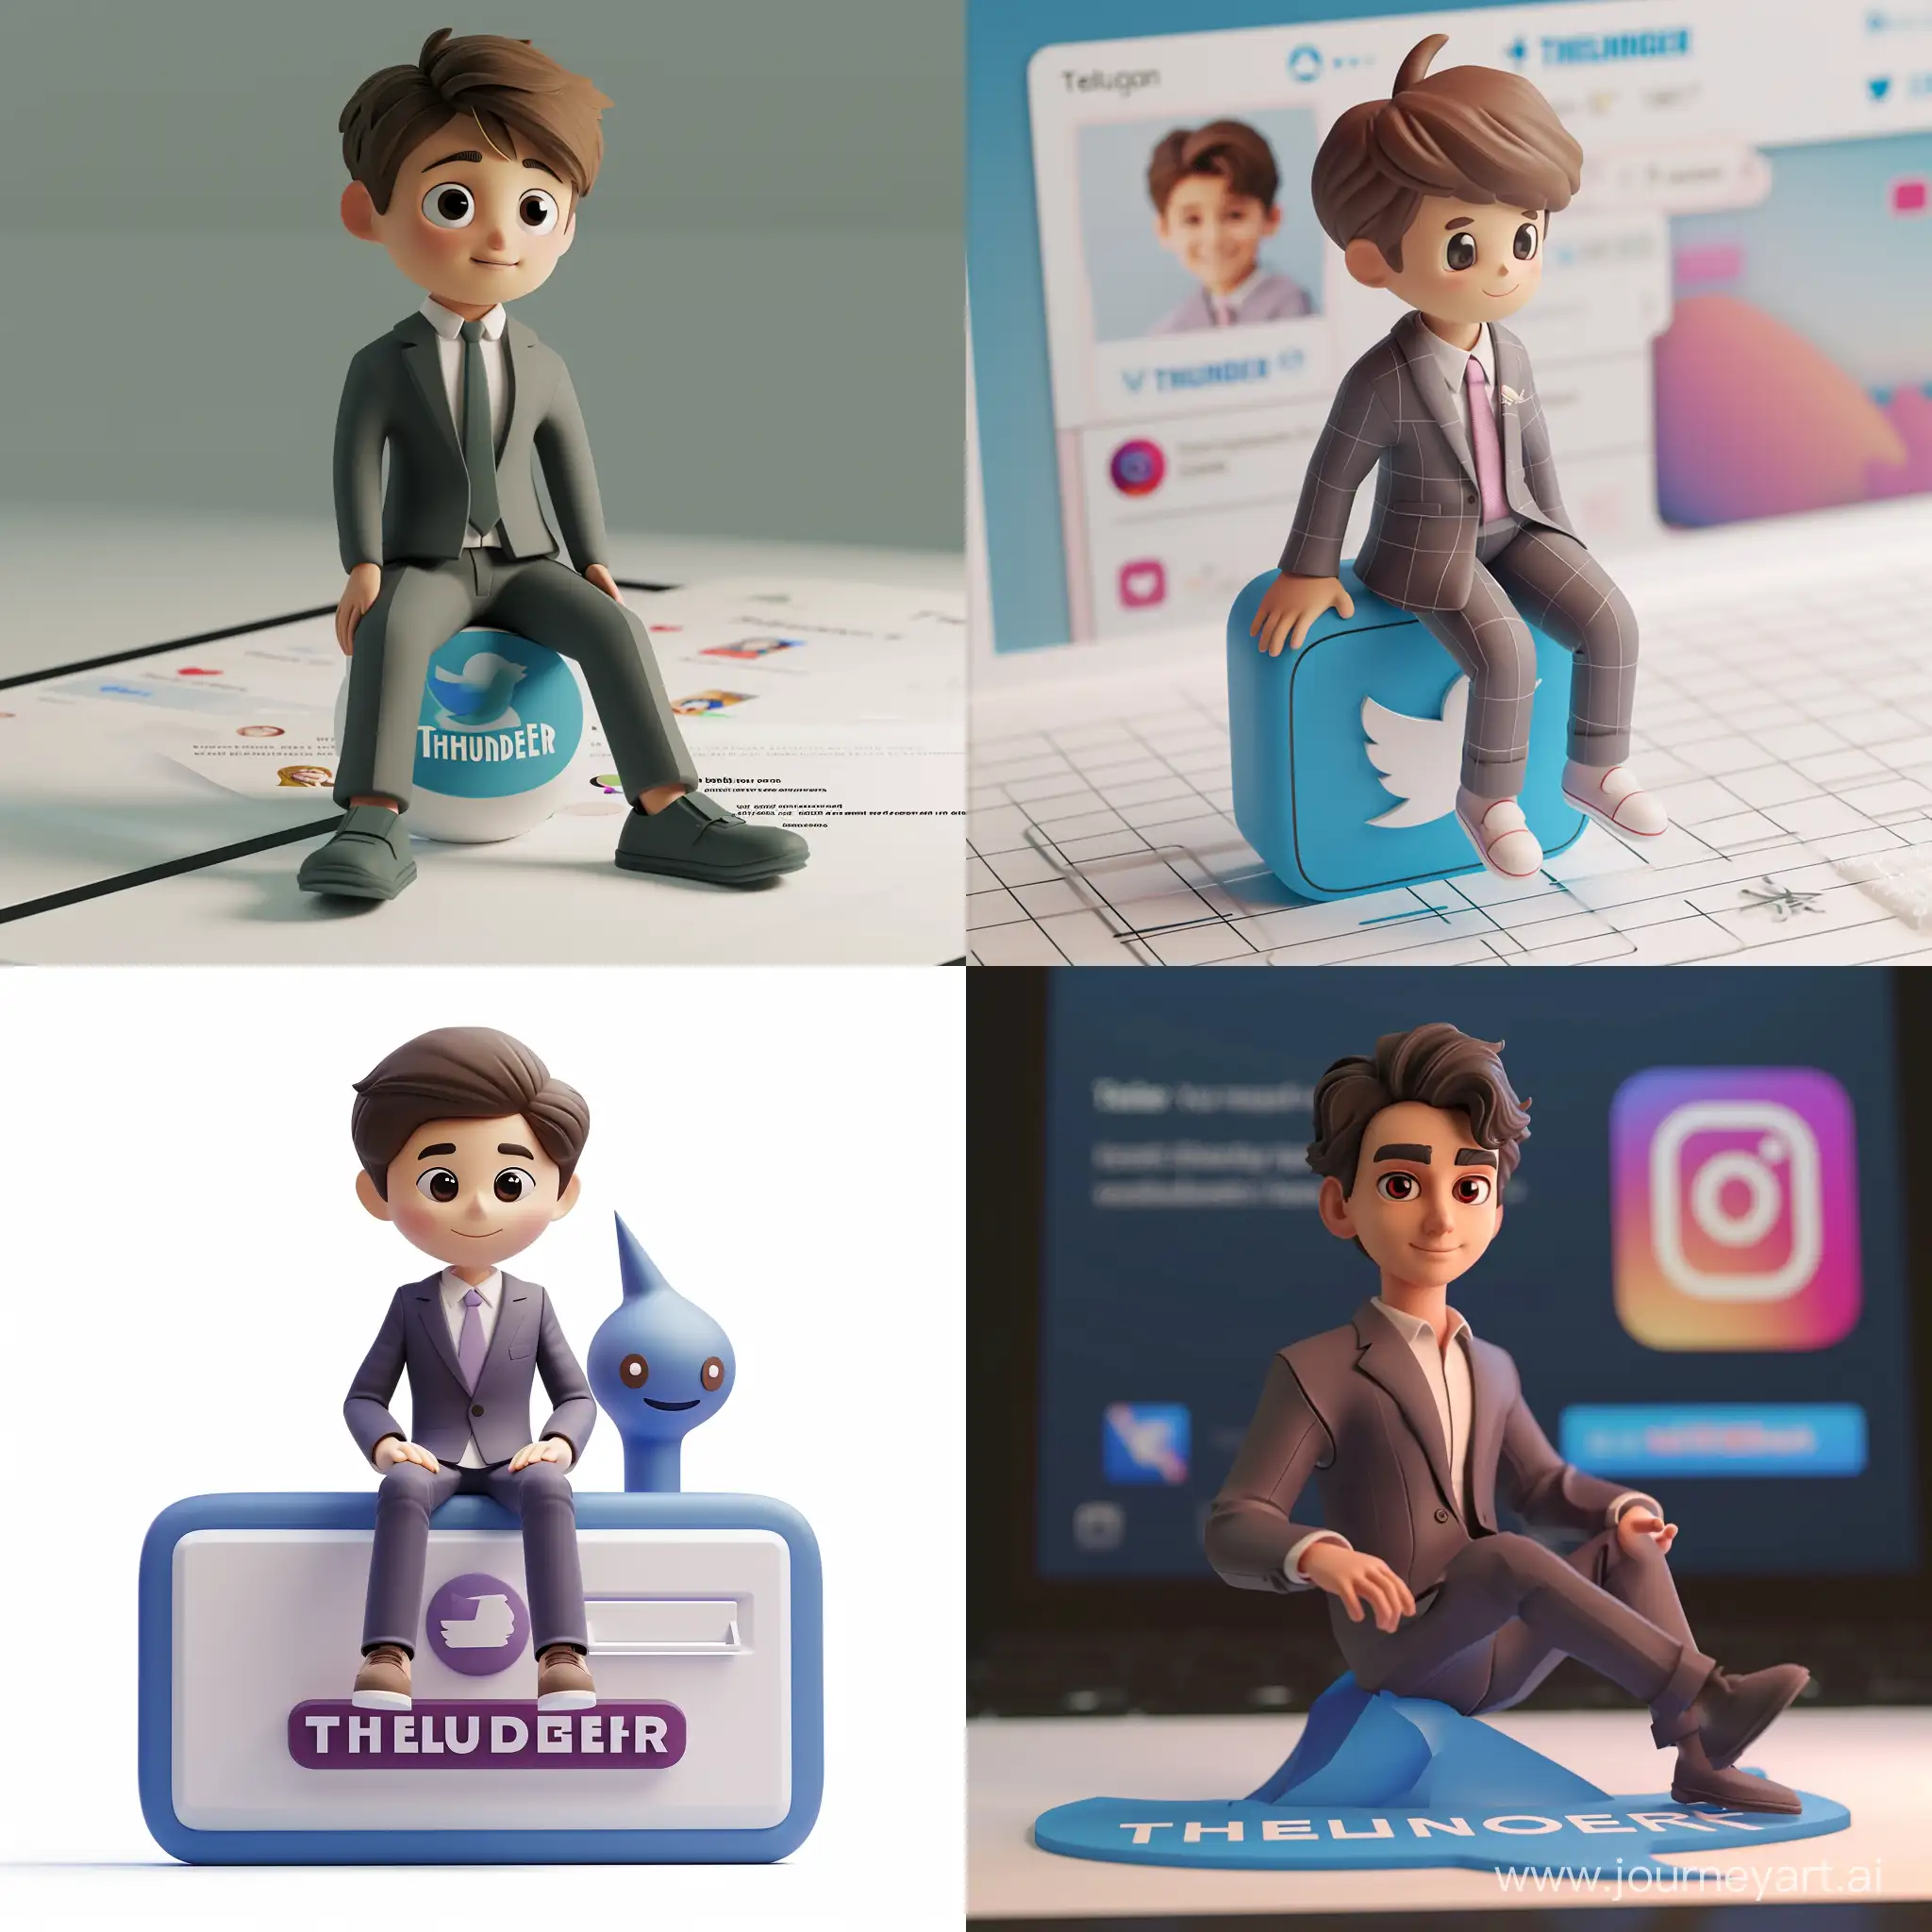 Create a 3D illustration of a Boy  animated character sitting casually on top of a social media logo "Telegram". The character must wear casual modern clothing such as"suit". The background of the image is a social media profile page with a user name "THUNDER" and a profile picture that match.